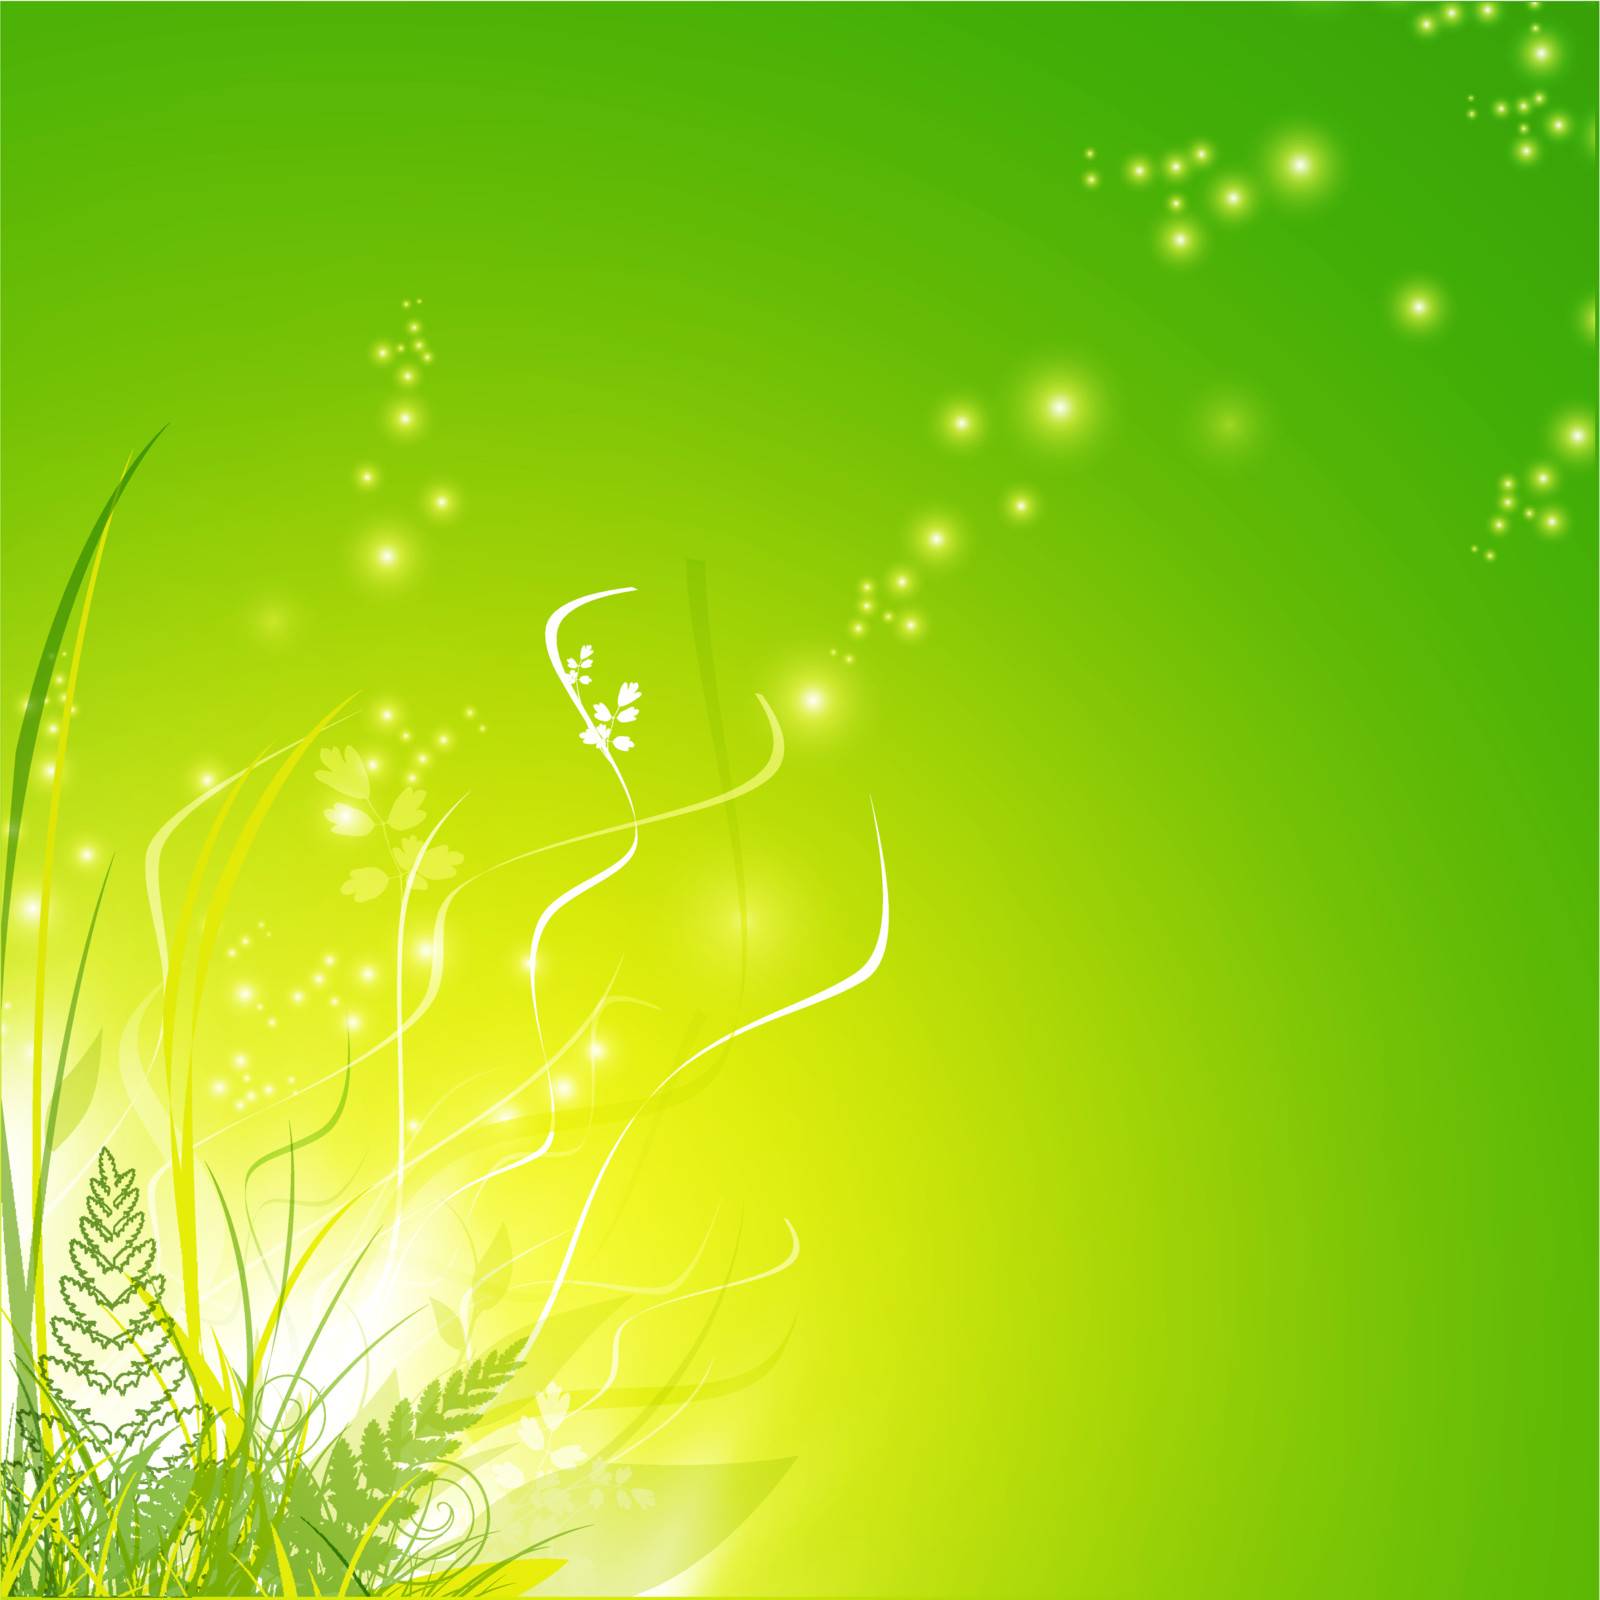 green grass and fern over magic floral decoration, copyspace